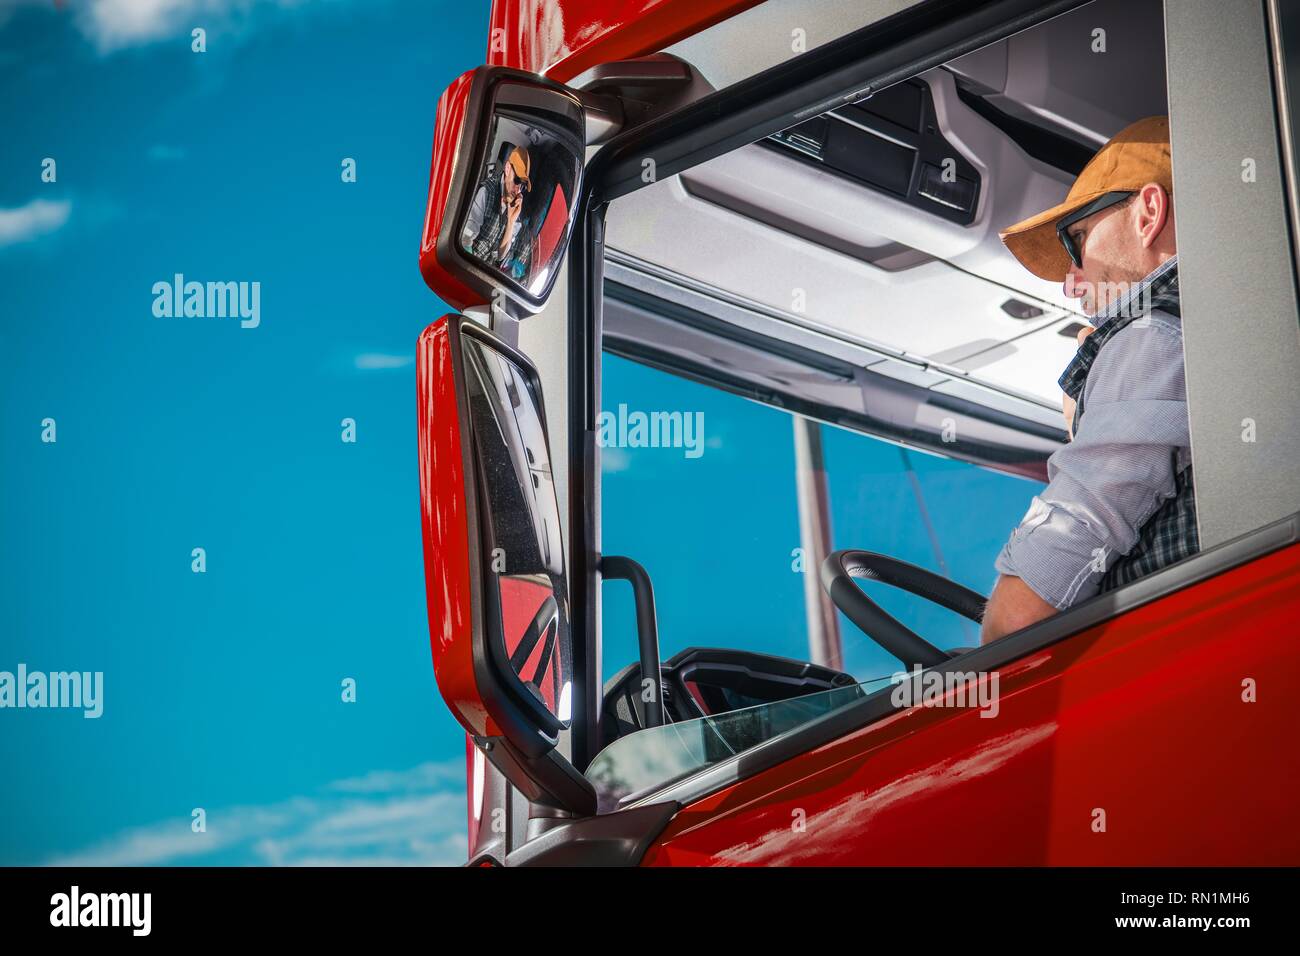 Transportation Industry Theme. Caucasian Truck Driver in His 30s Inside the Red Semi Cabin. Stock Photo